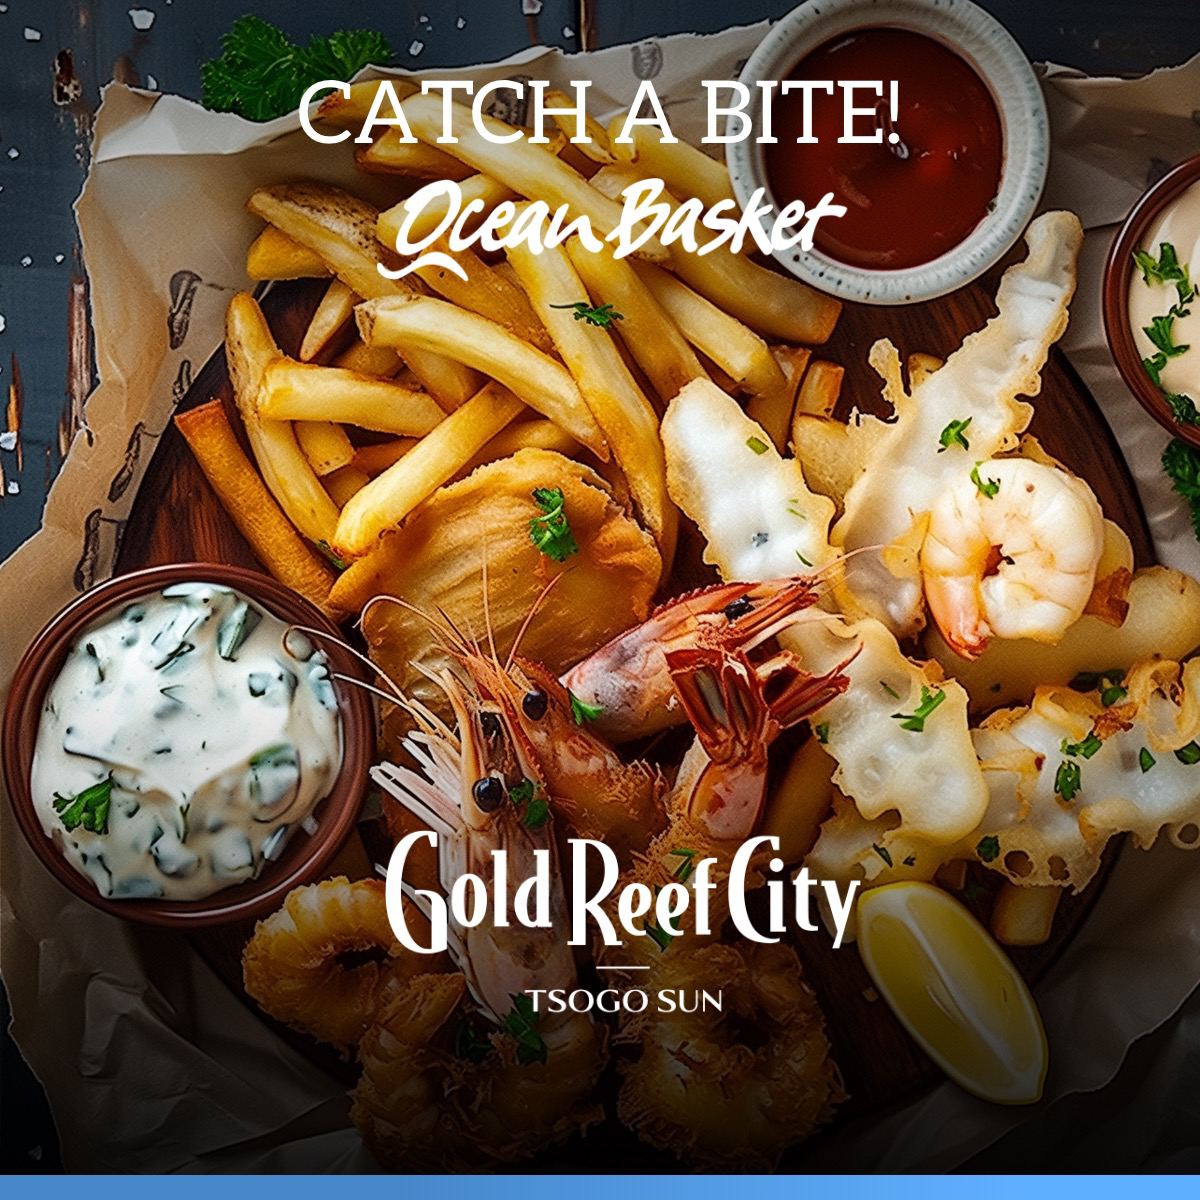 Dive into some sushi or the traditional fish and chips. Ocean Baskets has more dishes than fish in the sea. Pull up a chair and catch a bite fresh from the sea. bit.ly/3TWAOLI